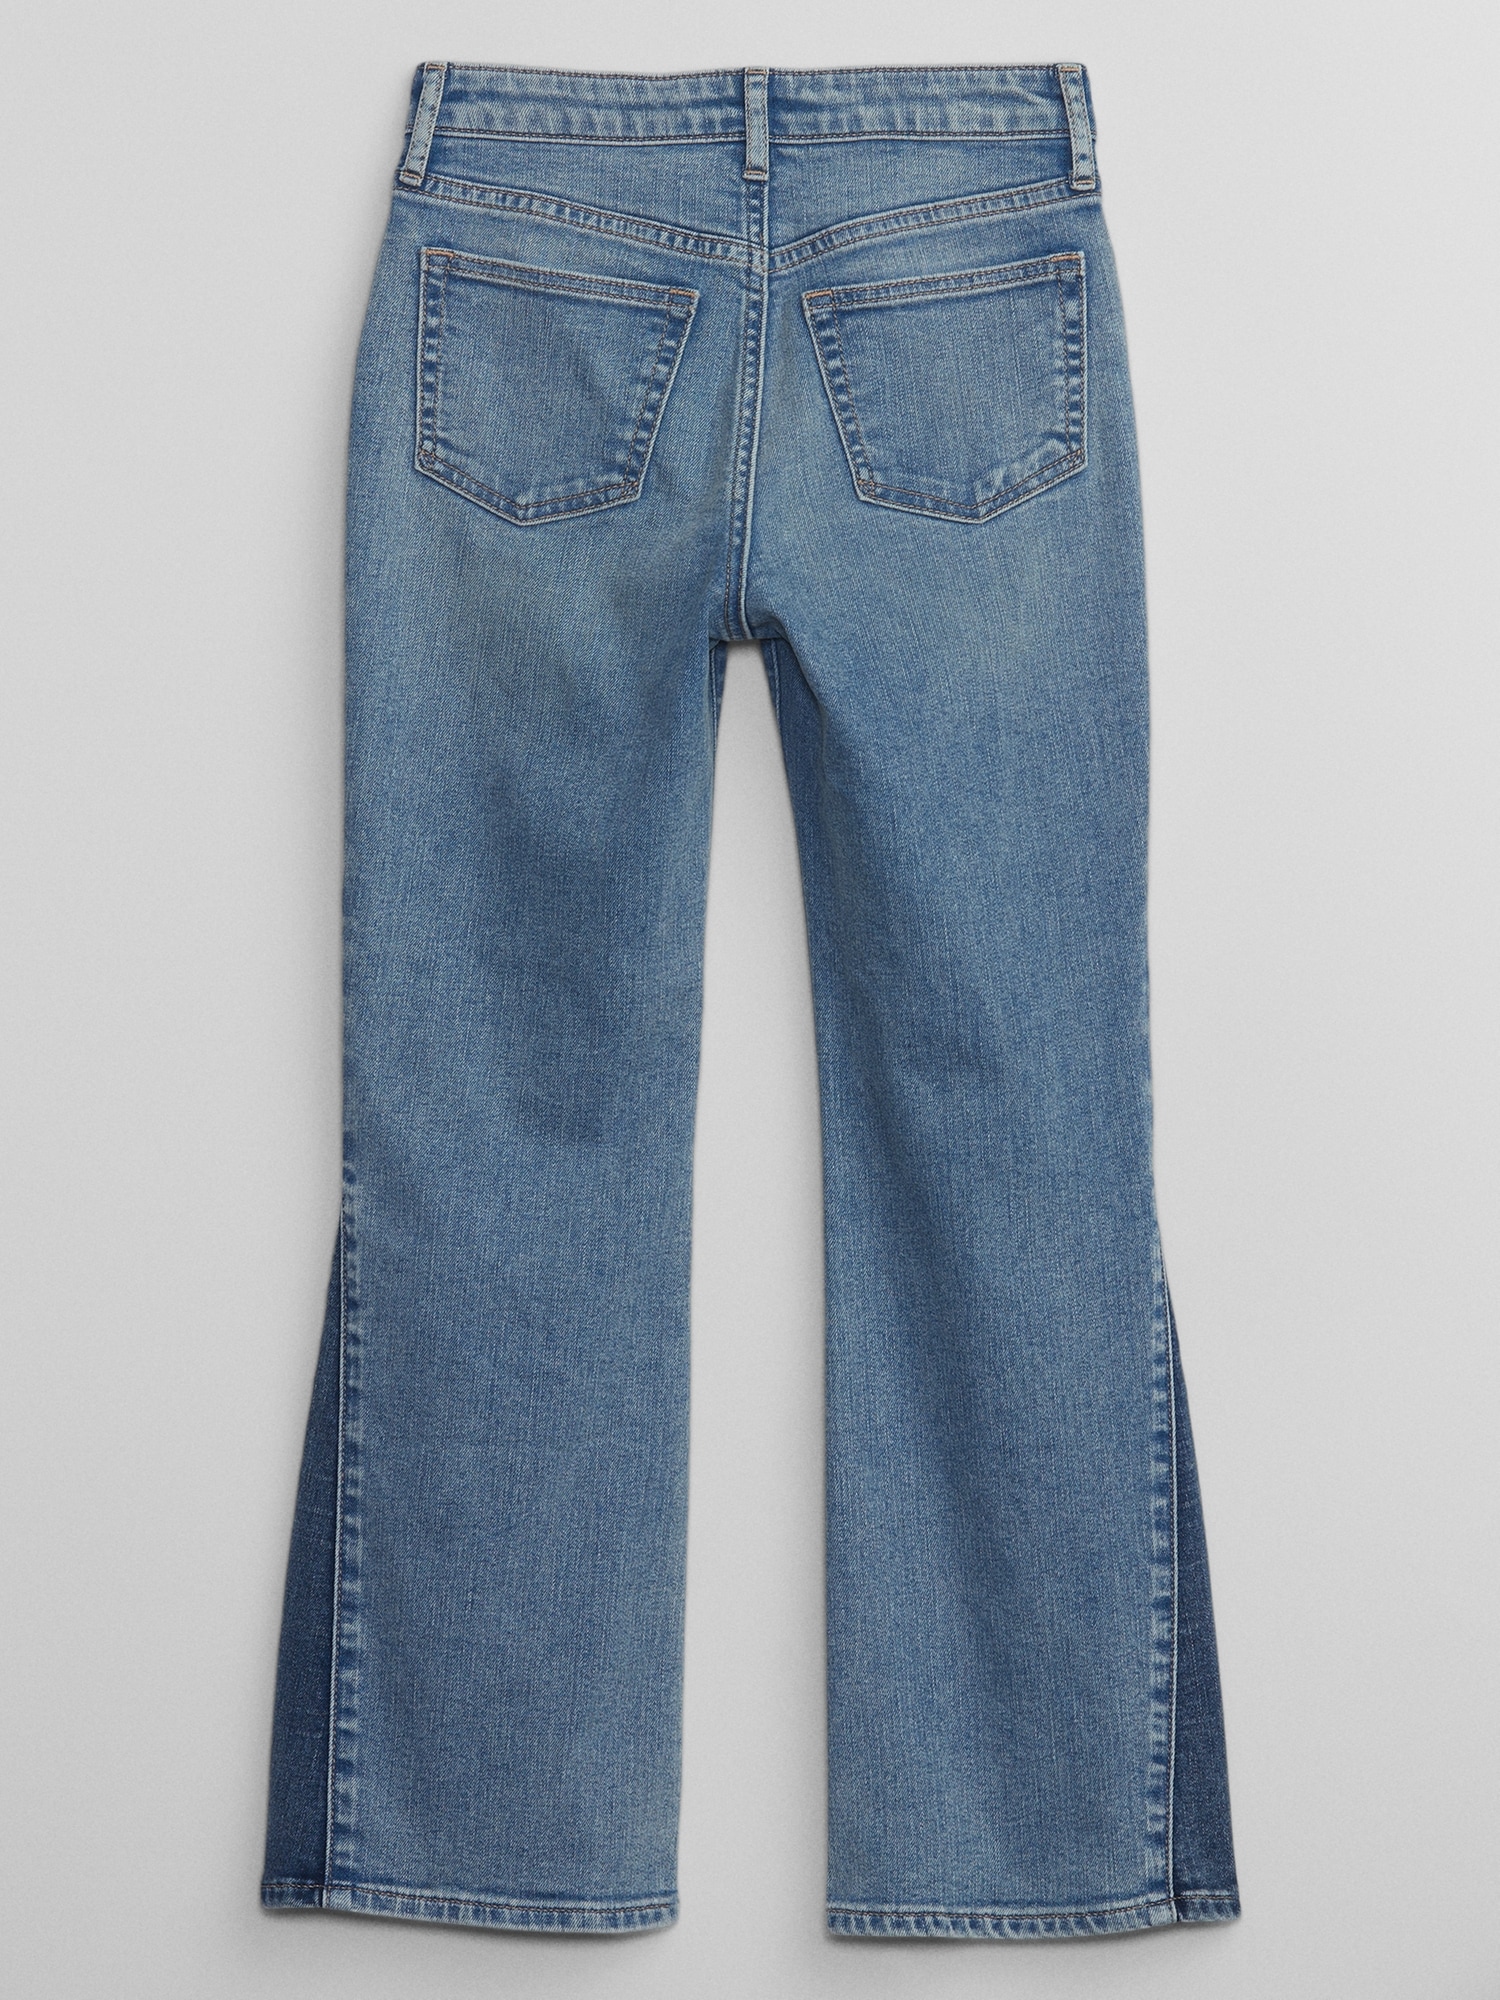  GAP Girls High Rise Flare Jeans Light WASH 5: Clothing